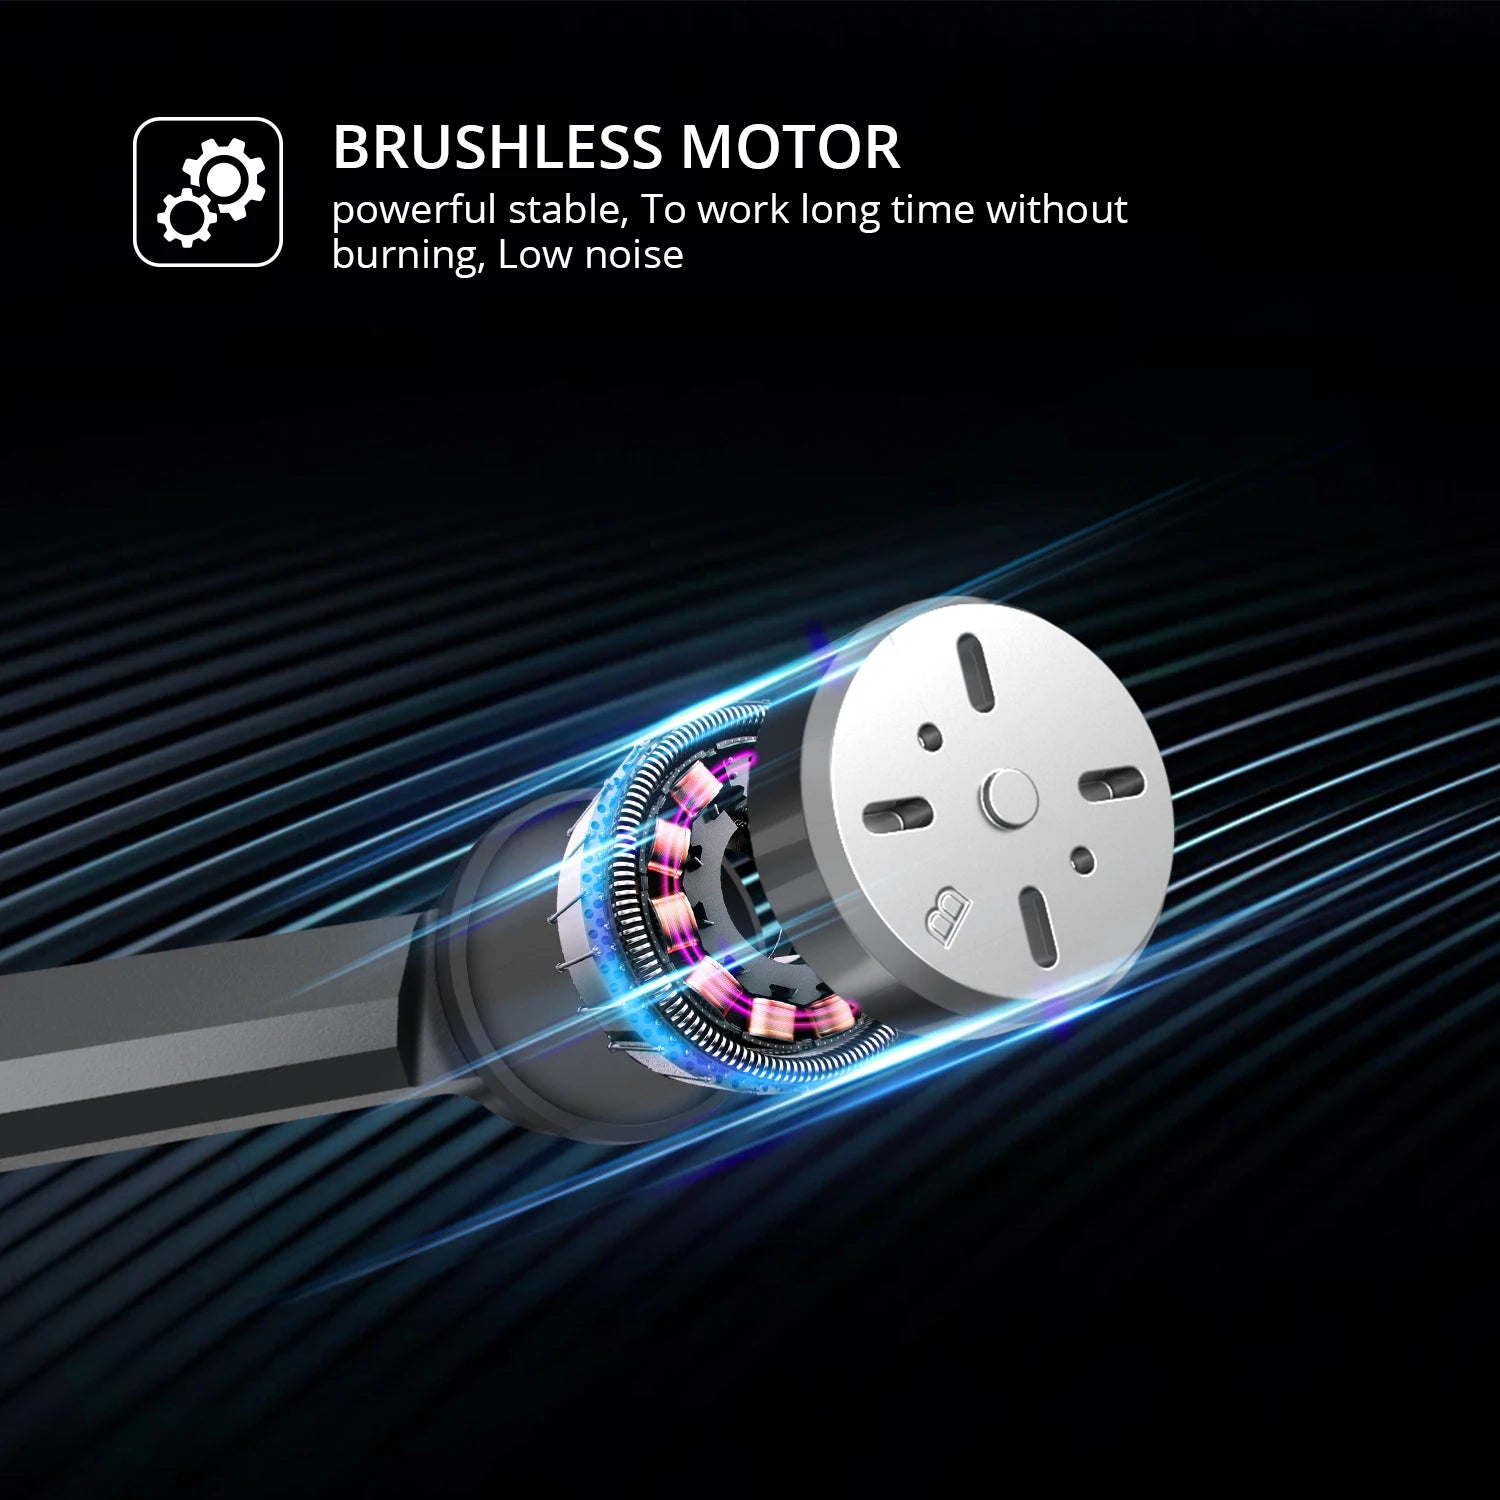 BRUSHLESS MOTOR powerful stable; To work long time without burning; Low